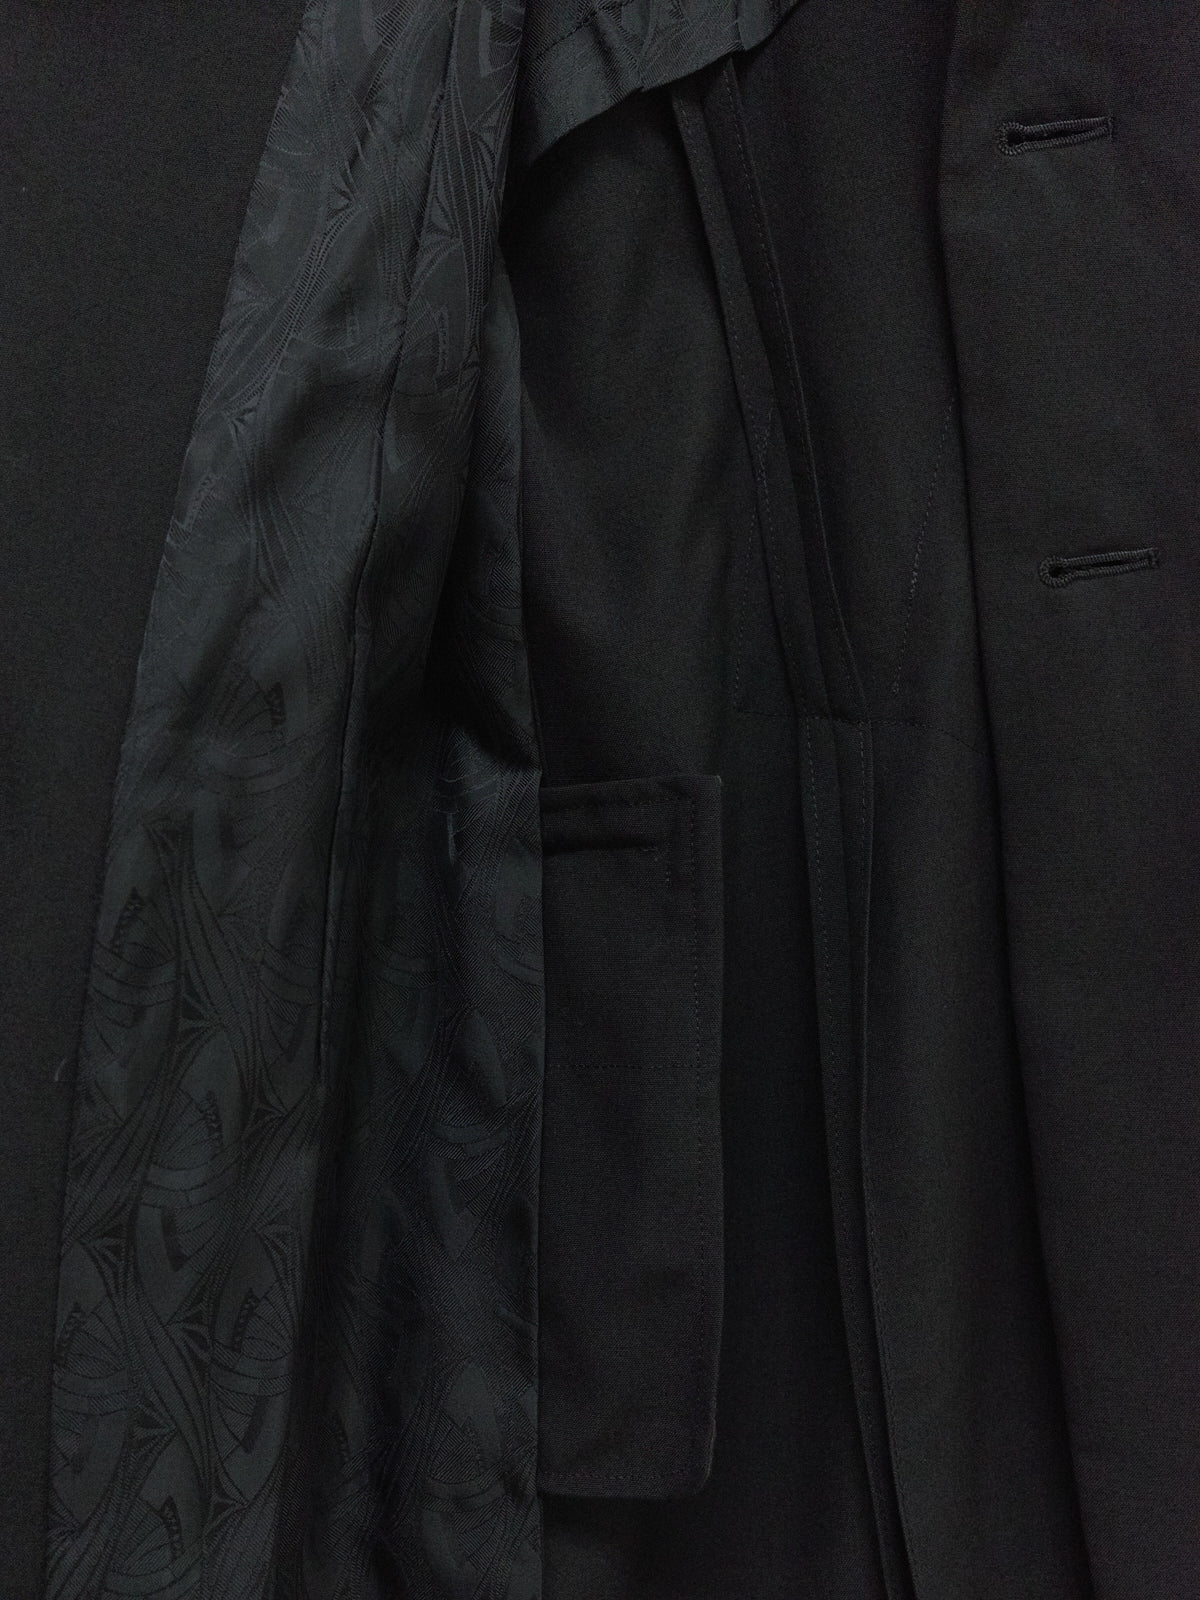 Comme des Garcons AW1992 black wool back tuck 3 button coat - womens M S